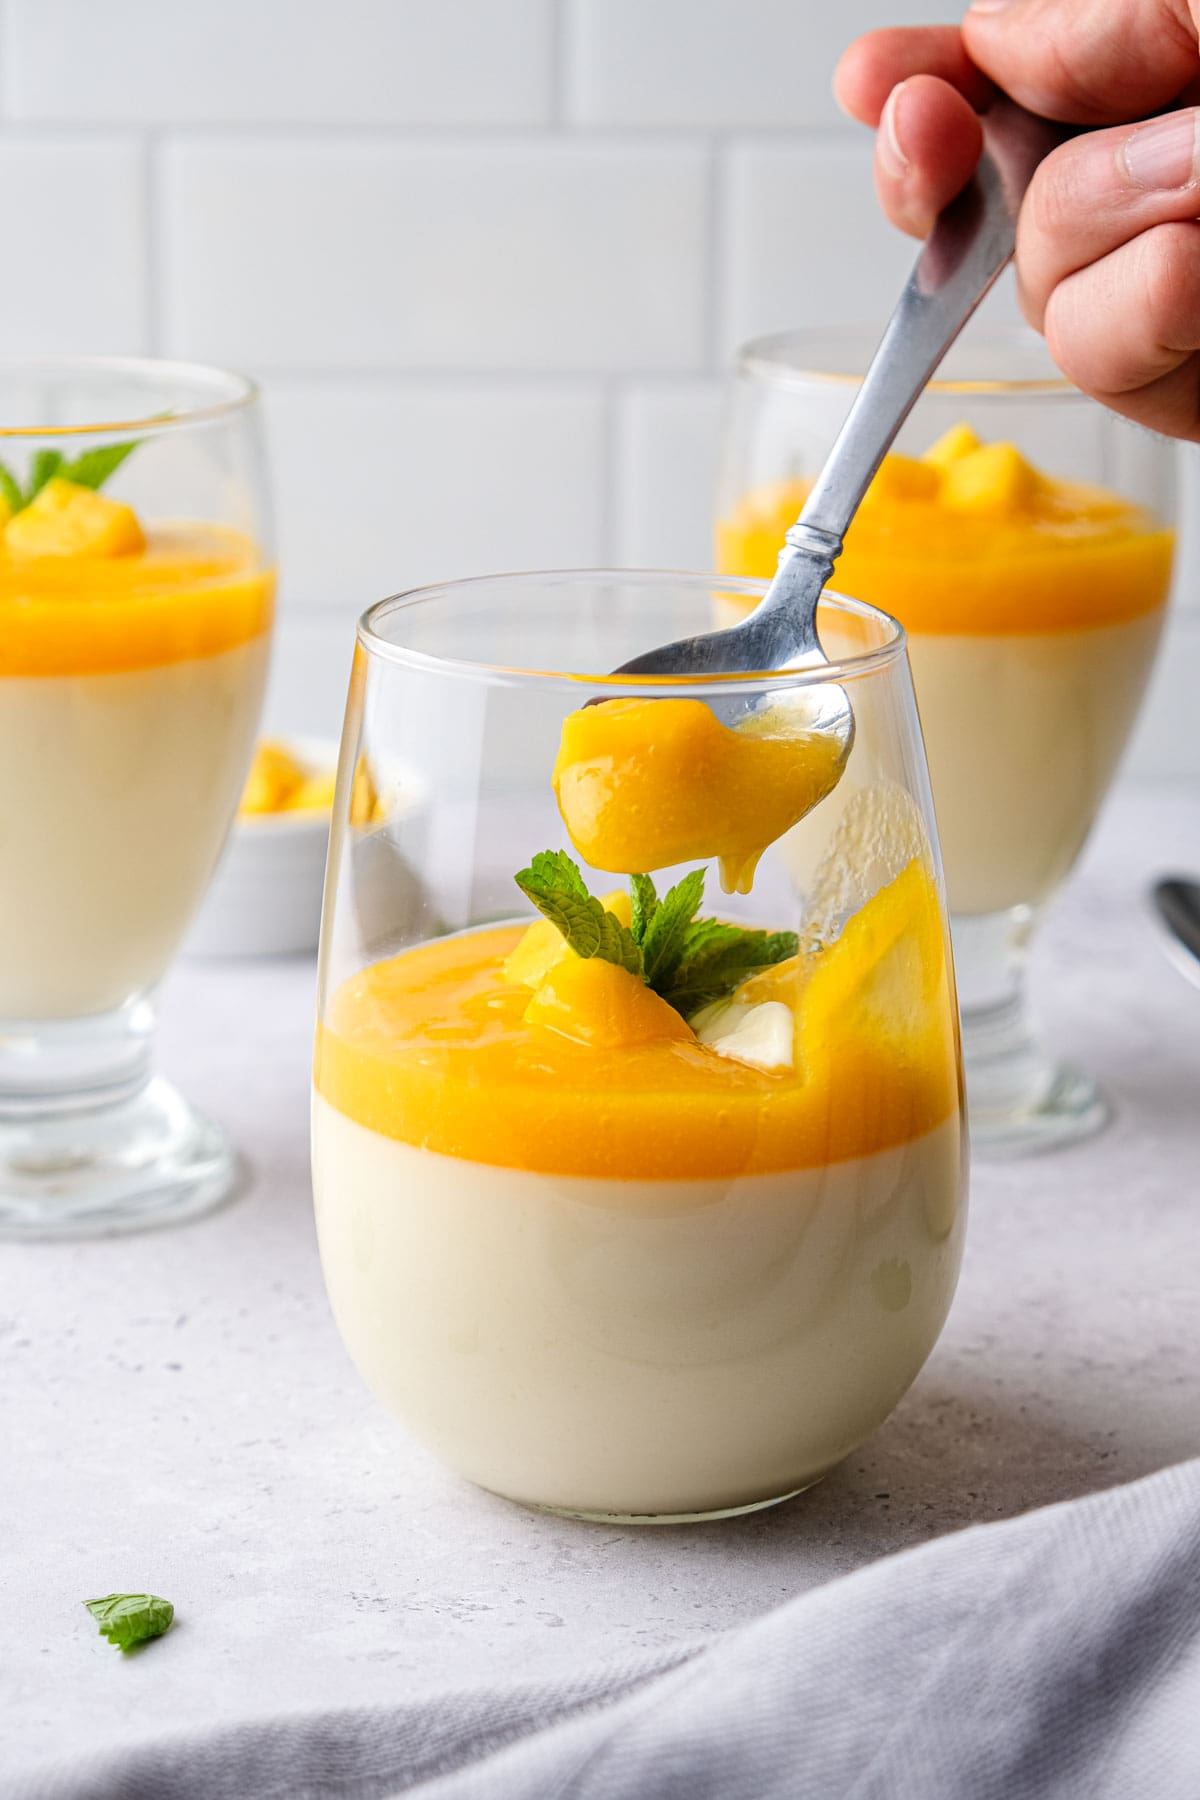 spoon scooping mango panna cotta out of clear glass sitting in grey counter.